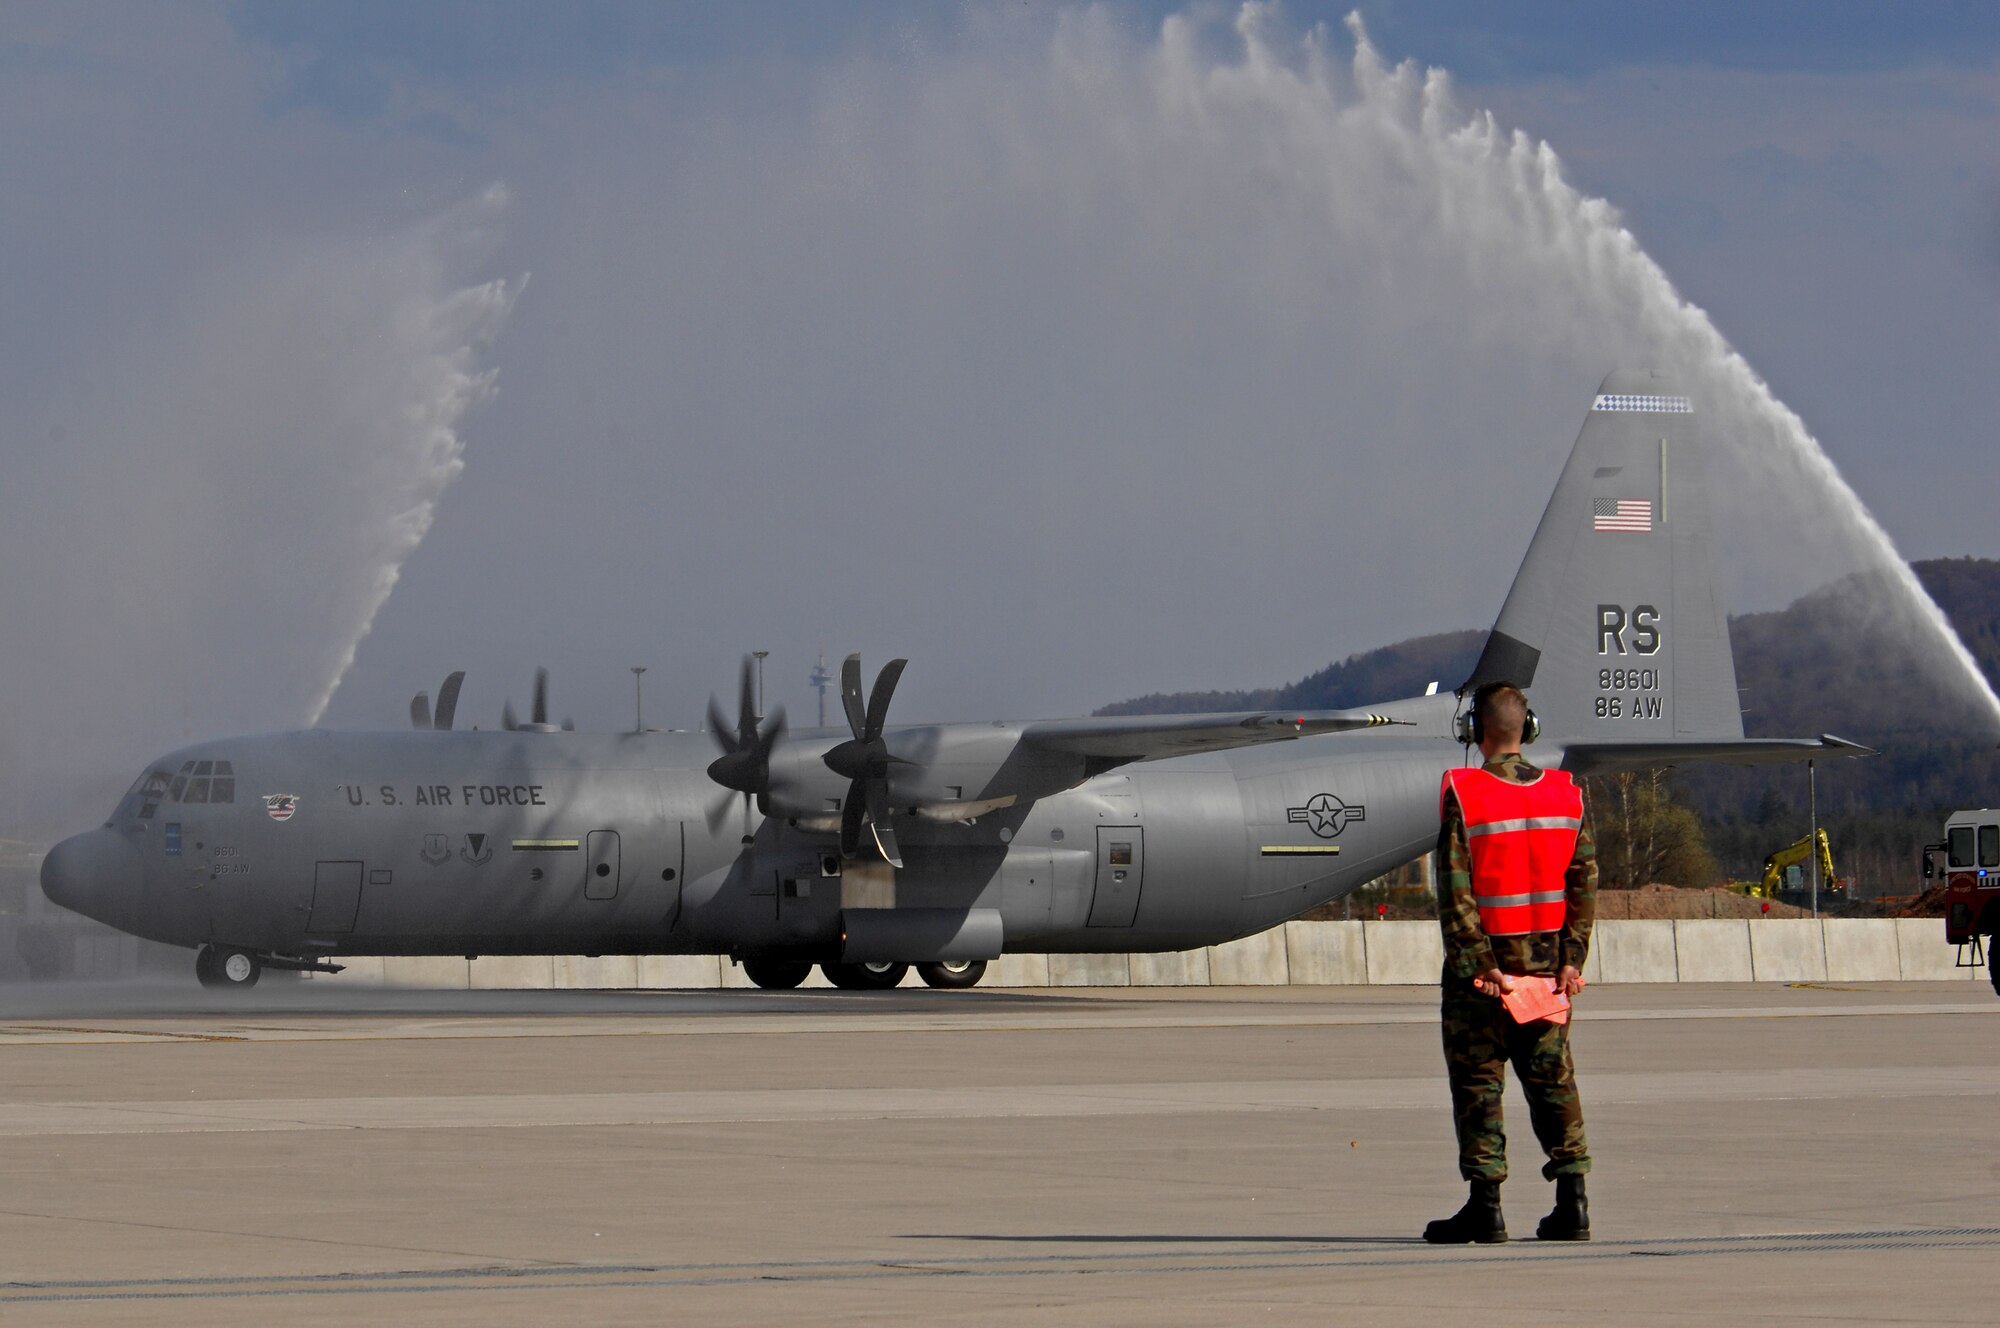 The first U.S. Air Force C-130J to be assigned to the Ramstein Air Base fleet taxies under pressured water from two Ramstein fire trucks during a celebration ceremony, April 7, 2009. The J-model landed on Ramstein for the first time during a ceremony today held to not only honor the arrival of the new aircraft, but also a new era in operations for the 86th Airlift Wing. The ceremony also included a ribbon cutting for a new 68,000 square feet dual-bay maintenance hangar, which can hold two C-130J aircraft or one C-17.  (U.S. Air Force photo by Airman 1st Class Kenny Holston)